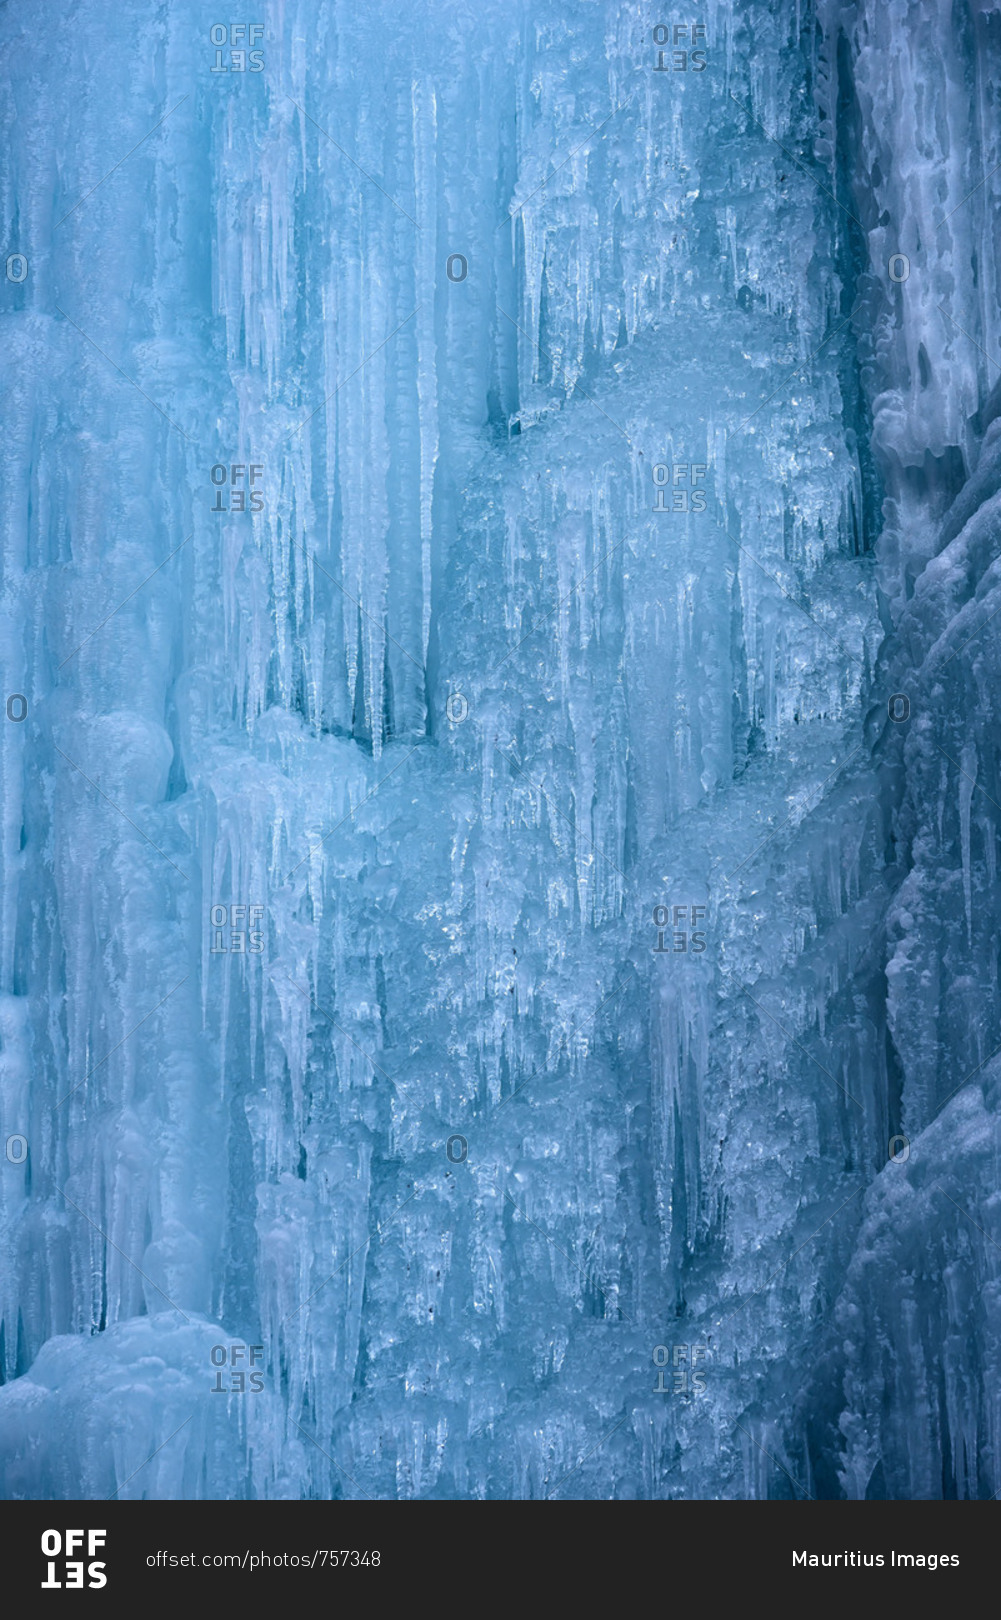 Blue ice in a waterfall in Hohe Tauern, Austria